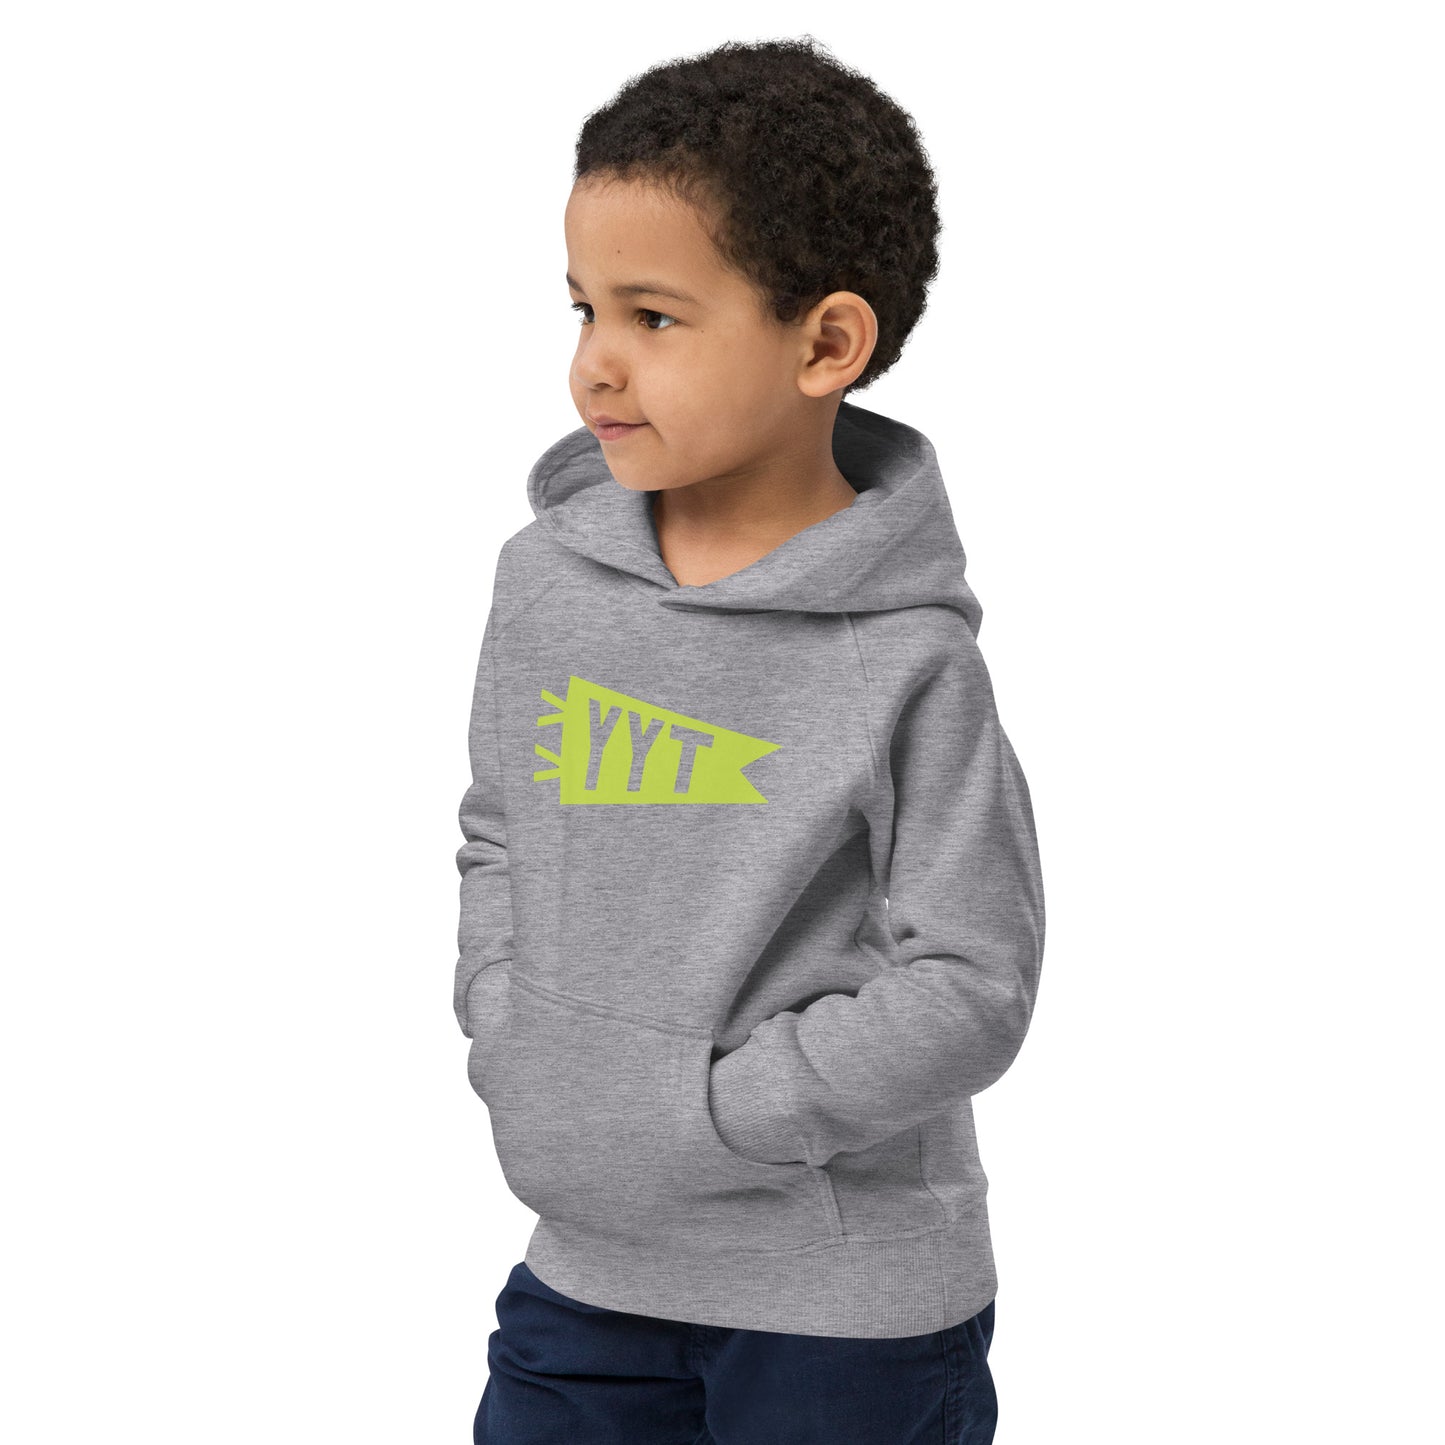 Kid's Sustainable Hoodie - Green Graphic • YYT St. John's • YHM Designs - Image 12